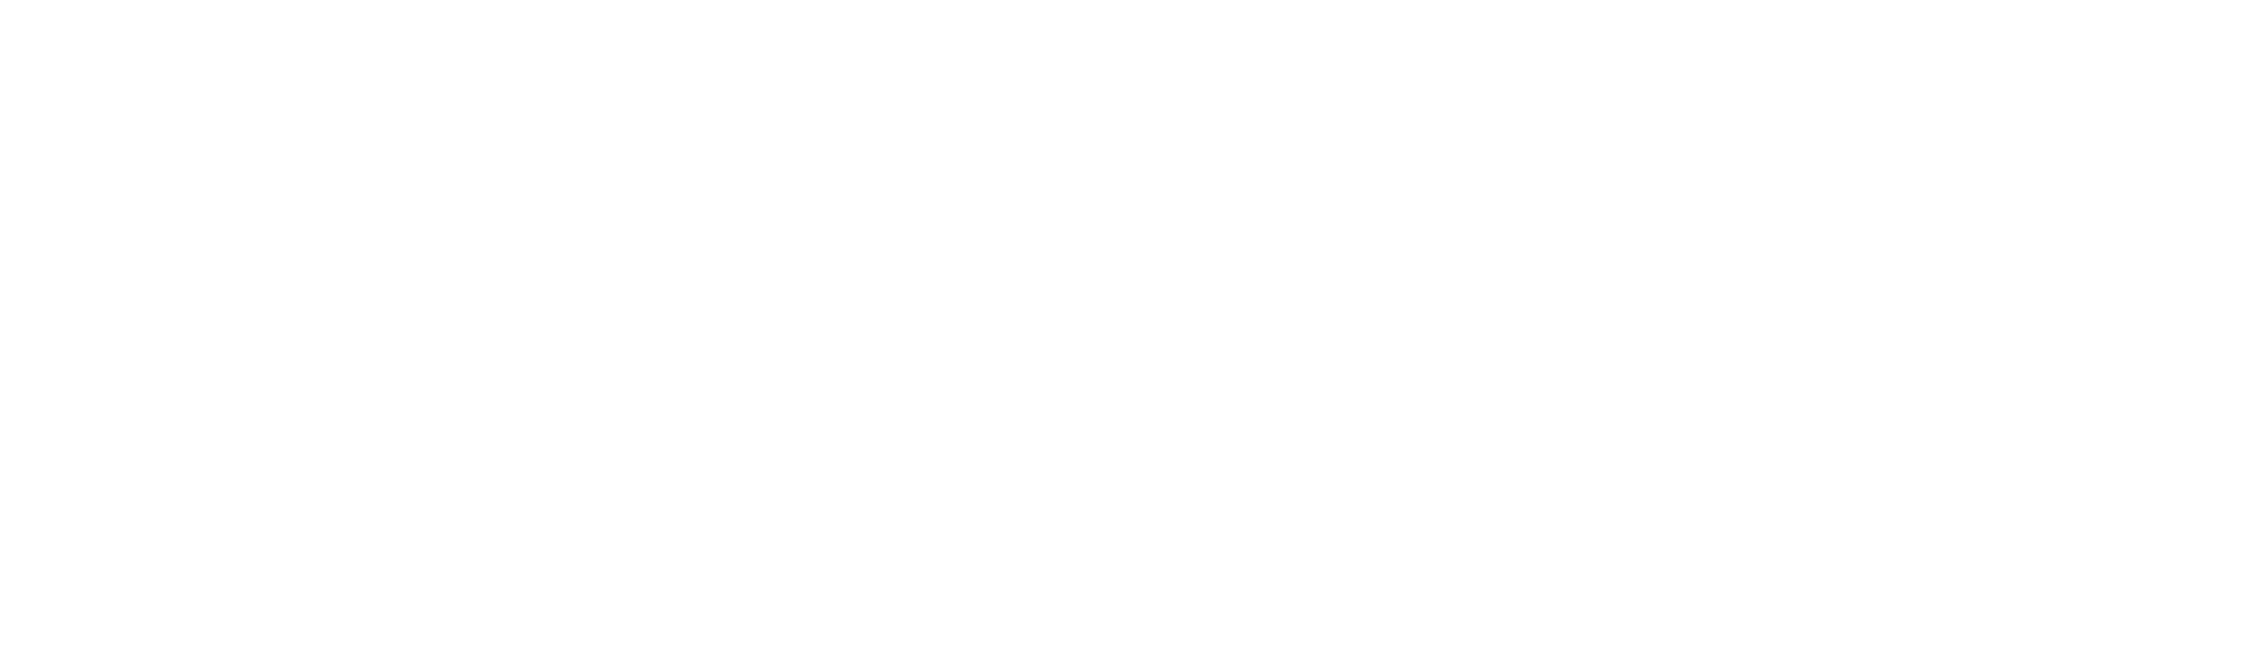 House Cleaning and Maid Service in Phoenix, AZ | Maid Easy